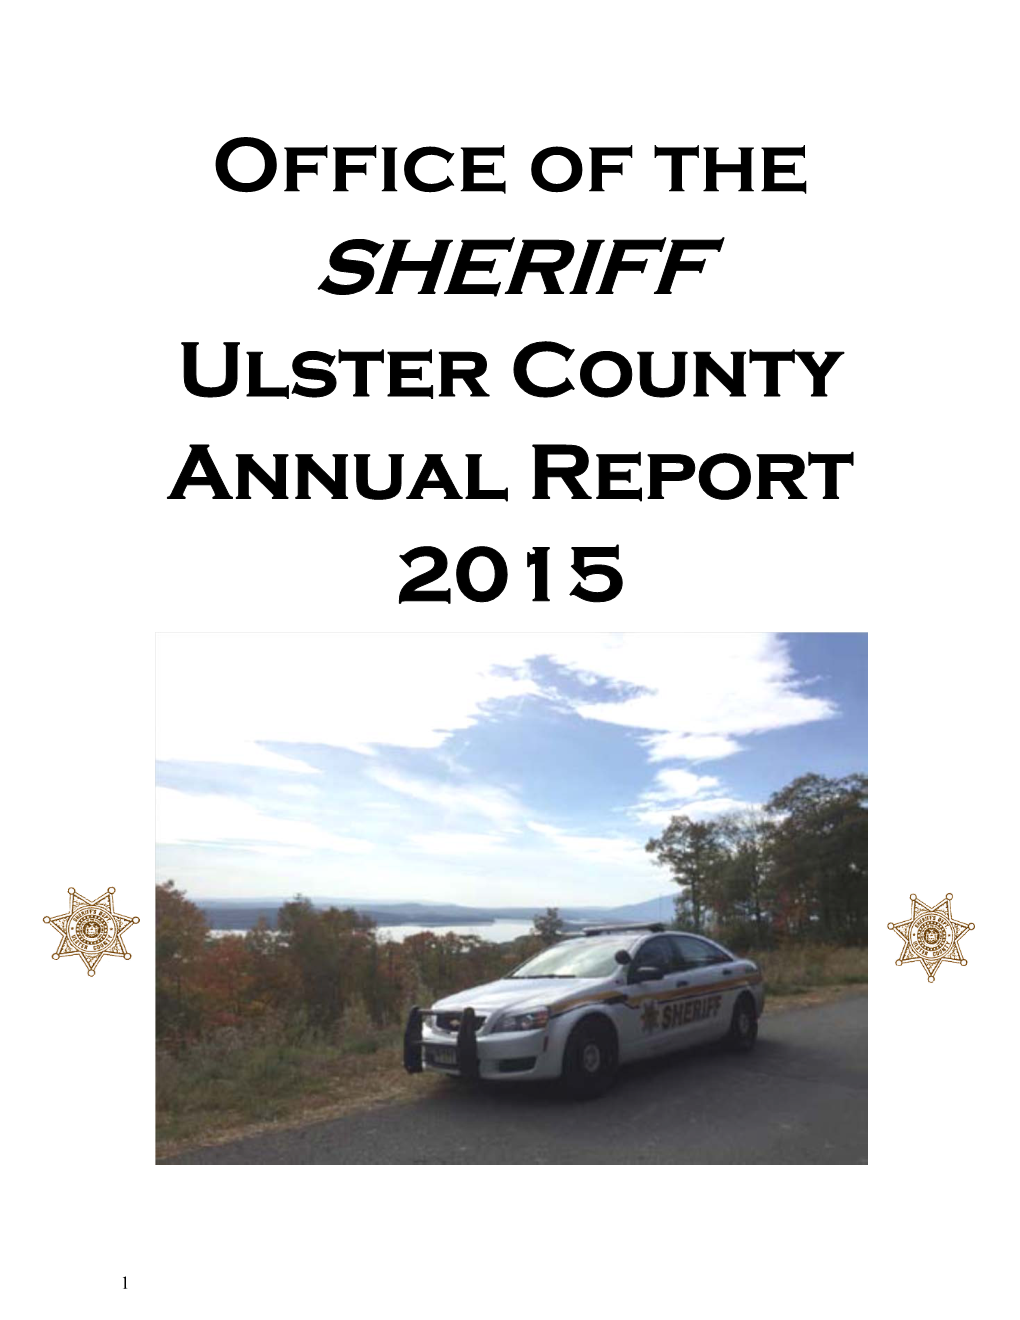 SHERIFF Ulster County Annual Report 2015